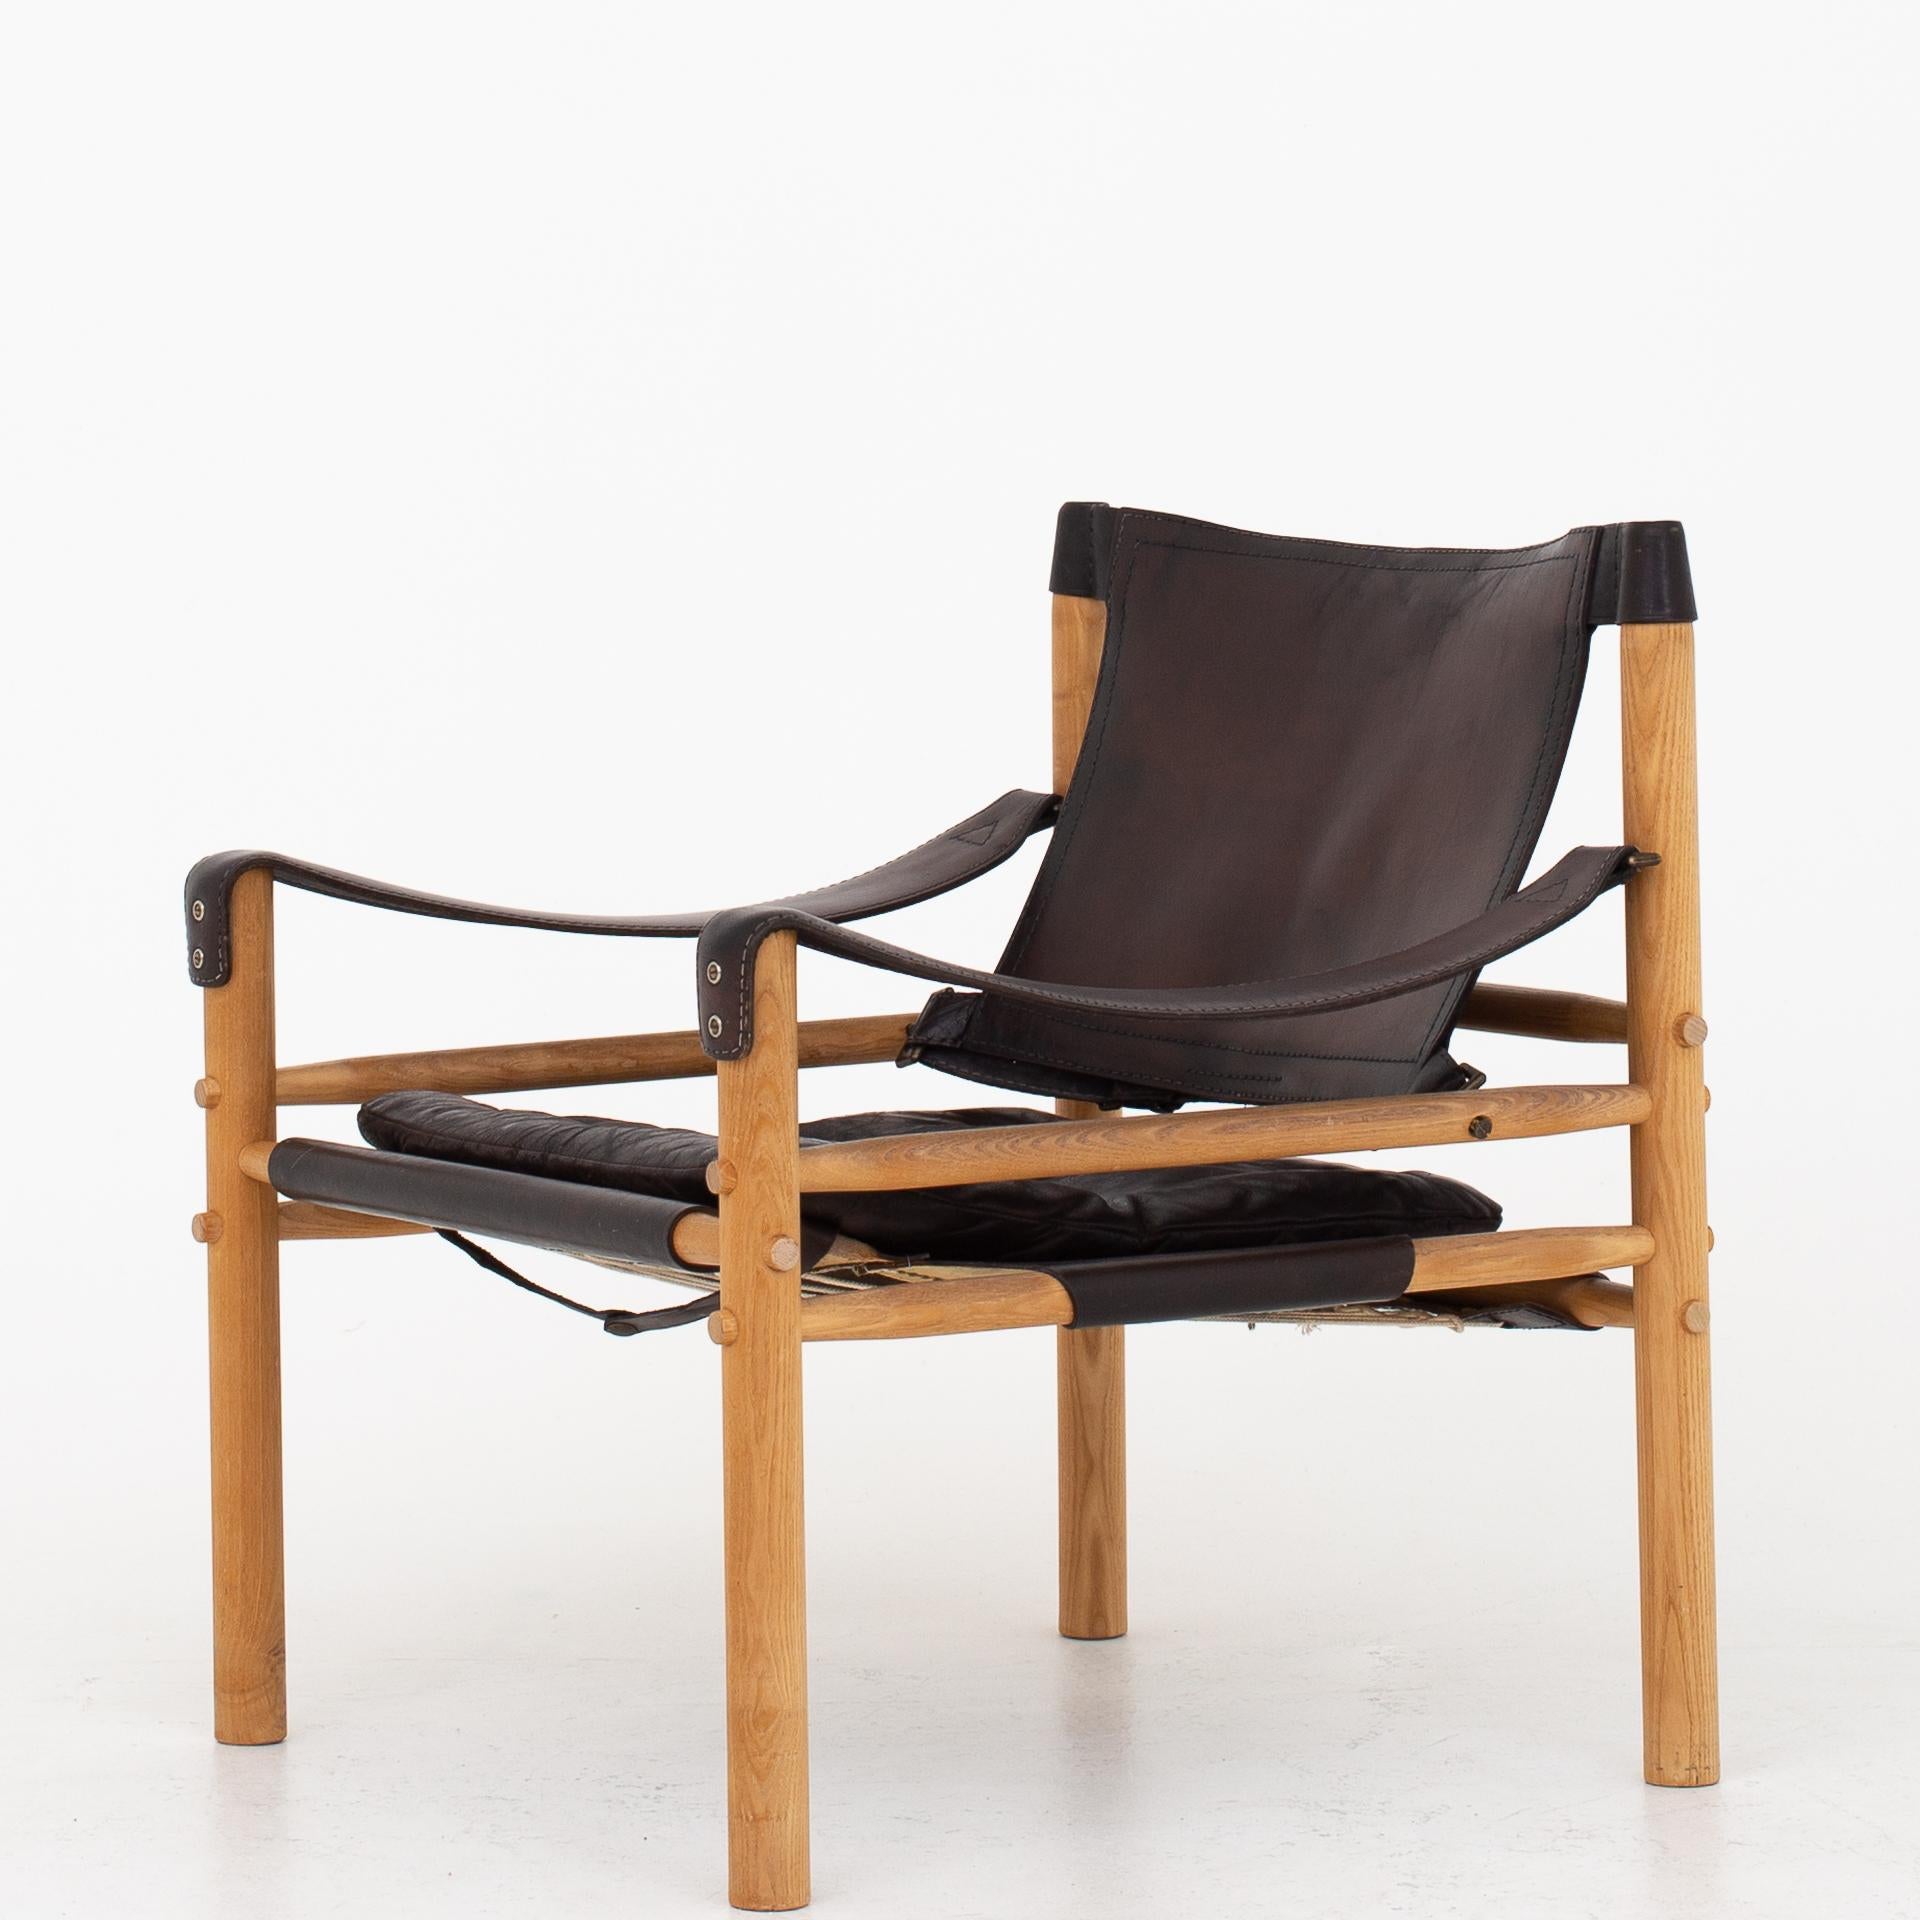 Two Scirocco safari chairs in ash and patinated black leather. Maker Norell Möbler AB.